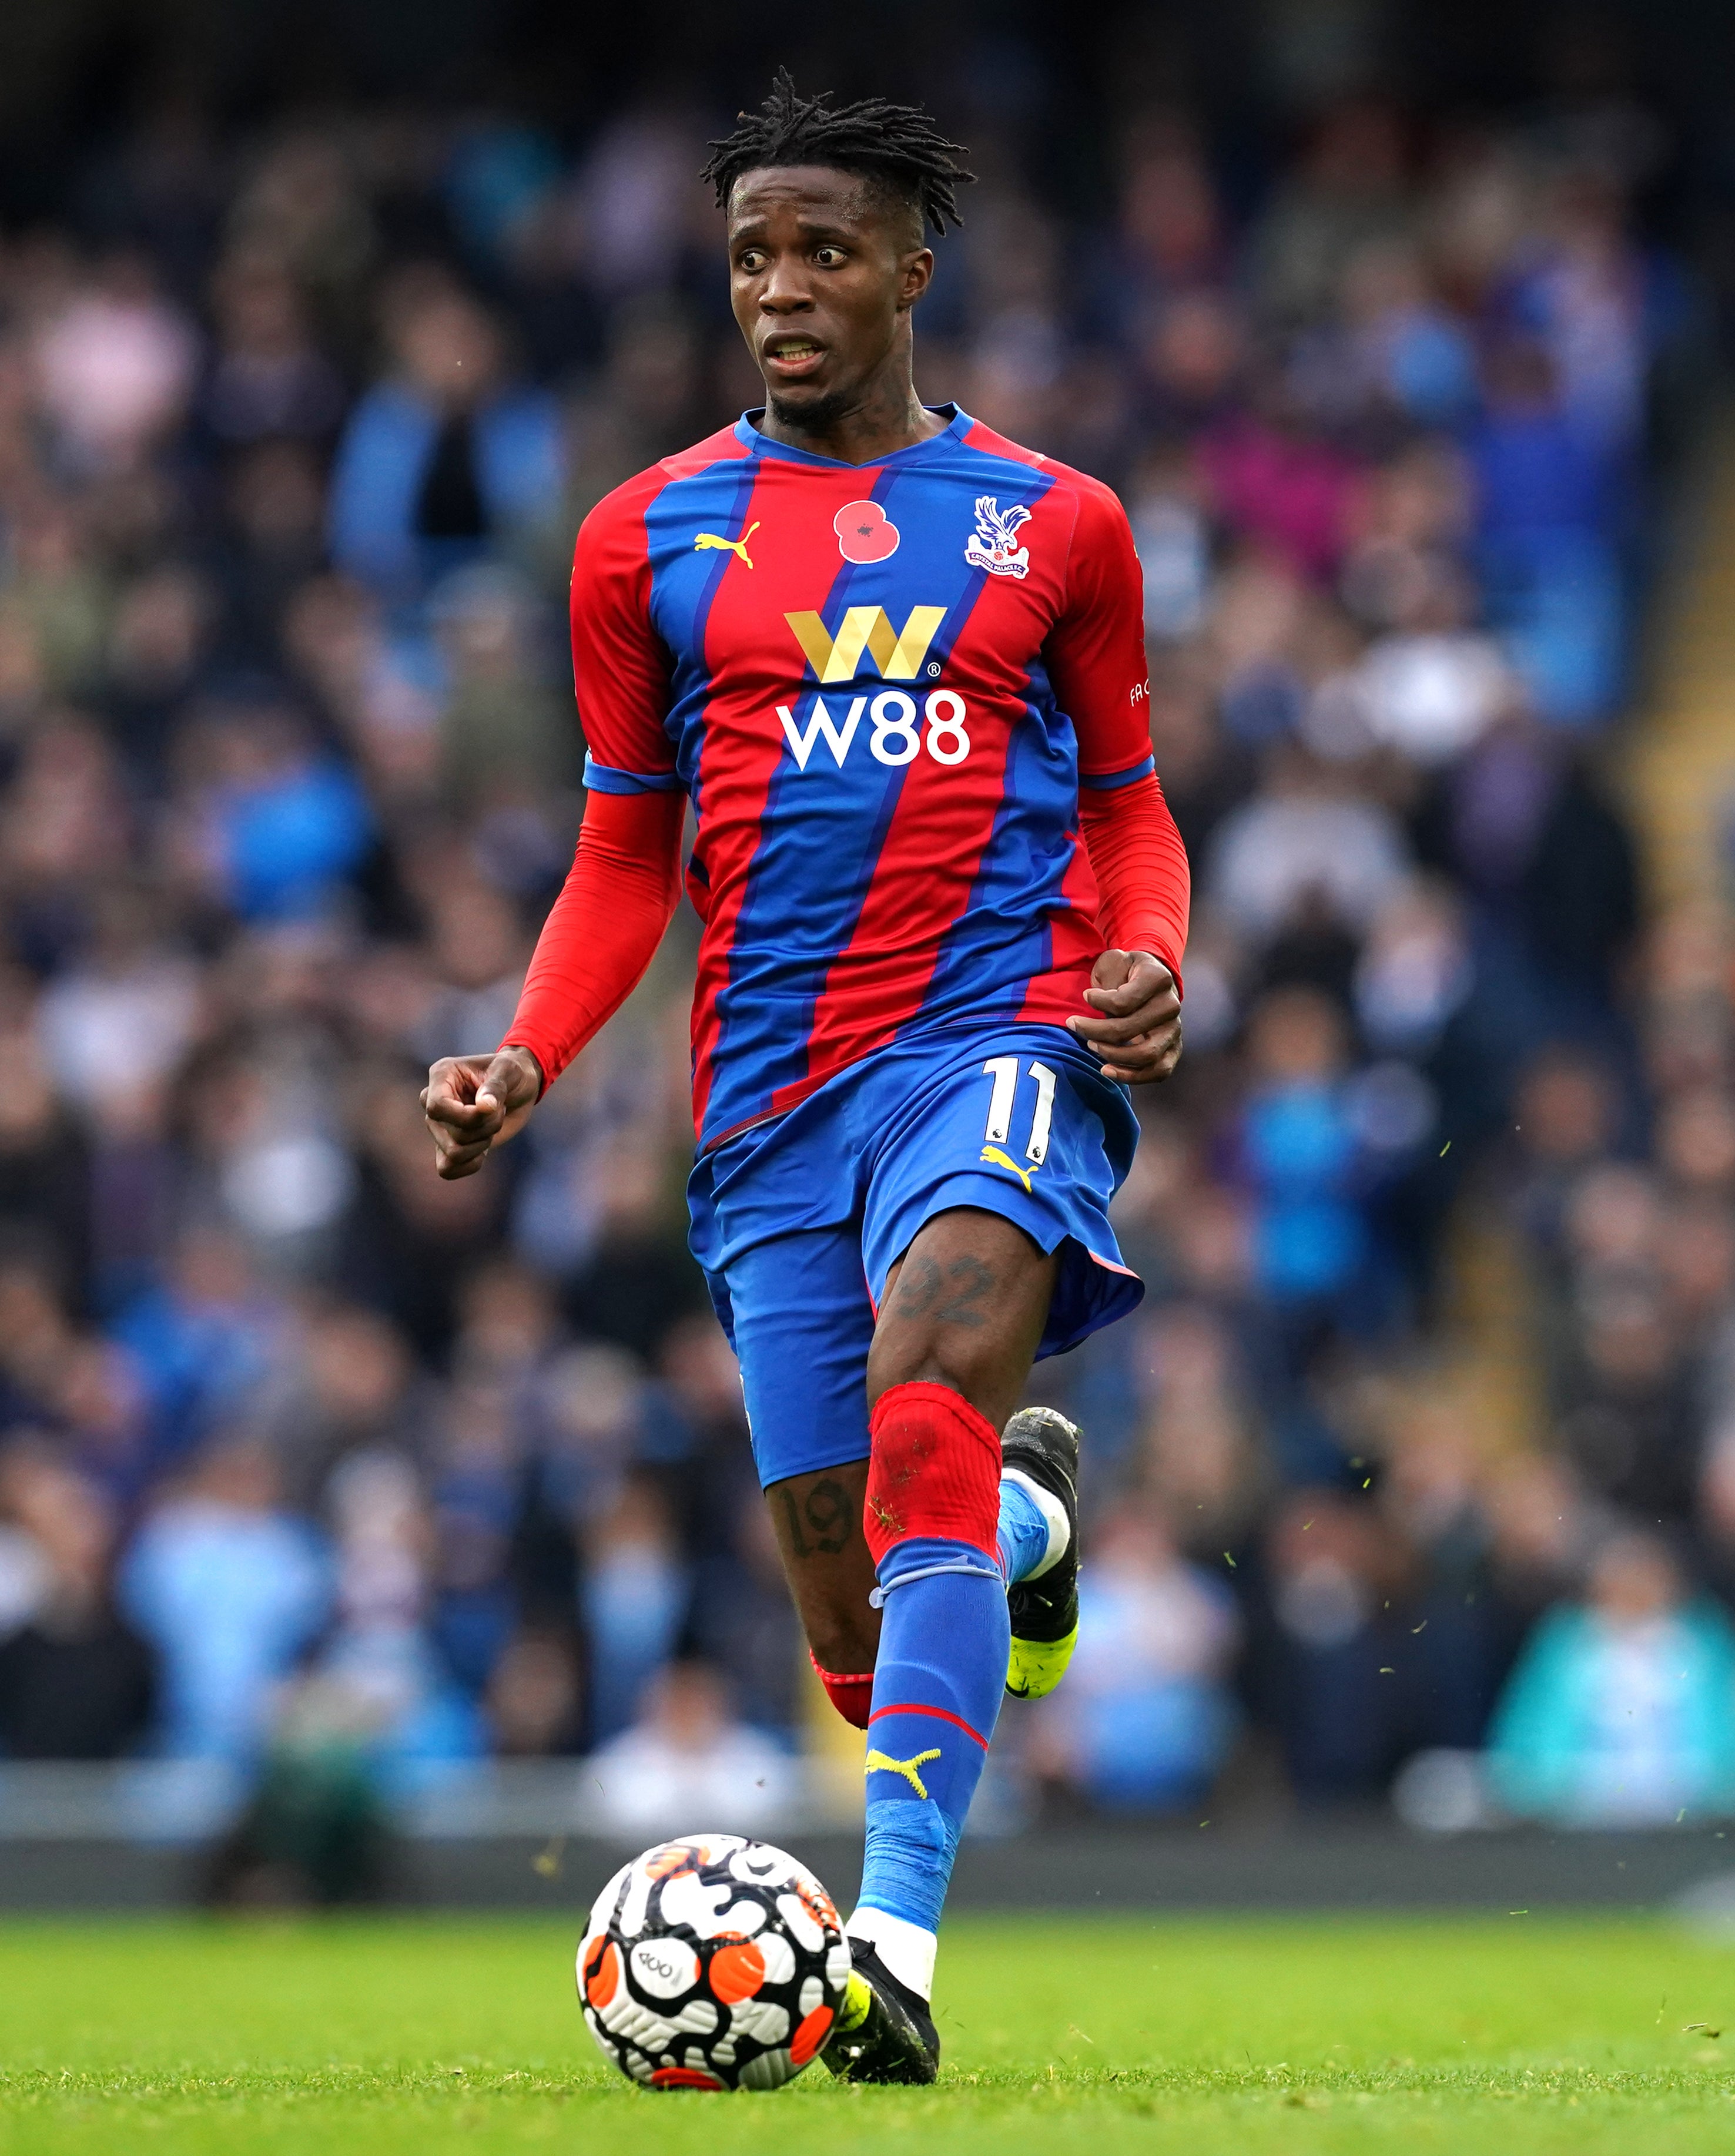 Crystal Palace’s Wilfried Zaha remains committed to the Ivory Coast national team, according to Patrick Vieira (Martin Rickett/PA)